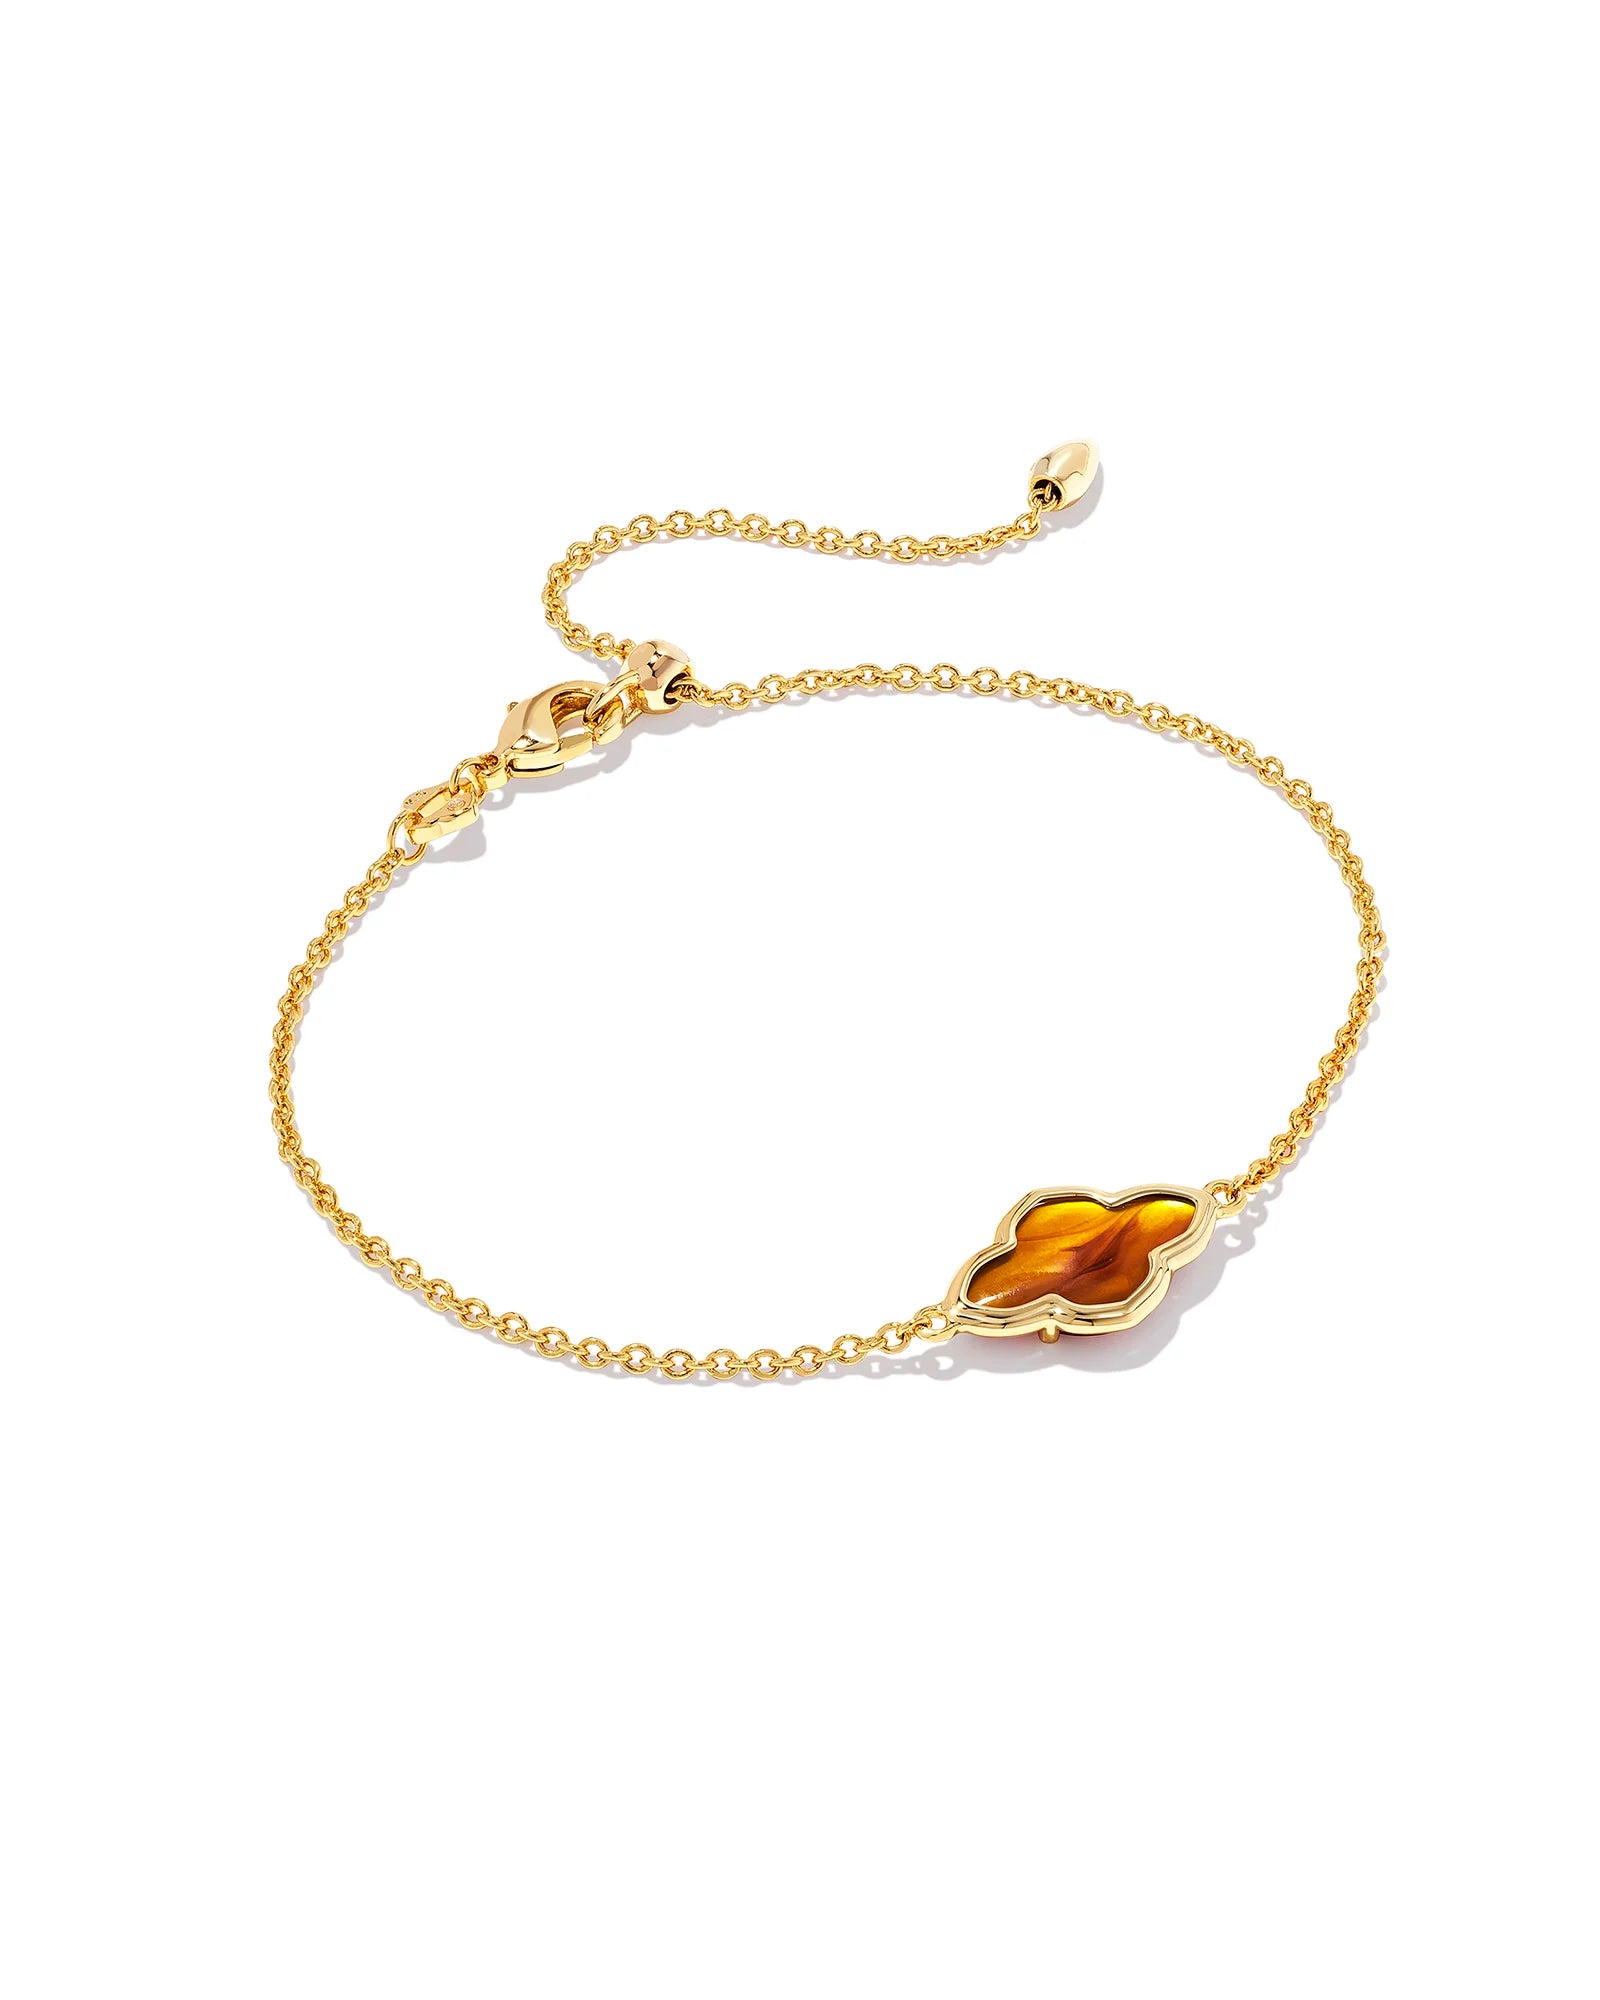 KENDRA SCOTT- Framed Abbie Gold Delicate Chain Bracelet in Marbled Amber Illusion